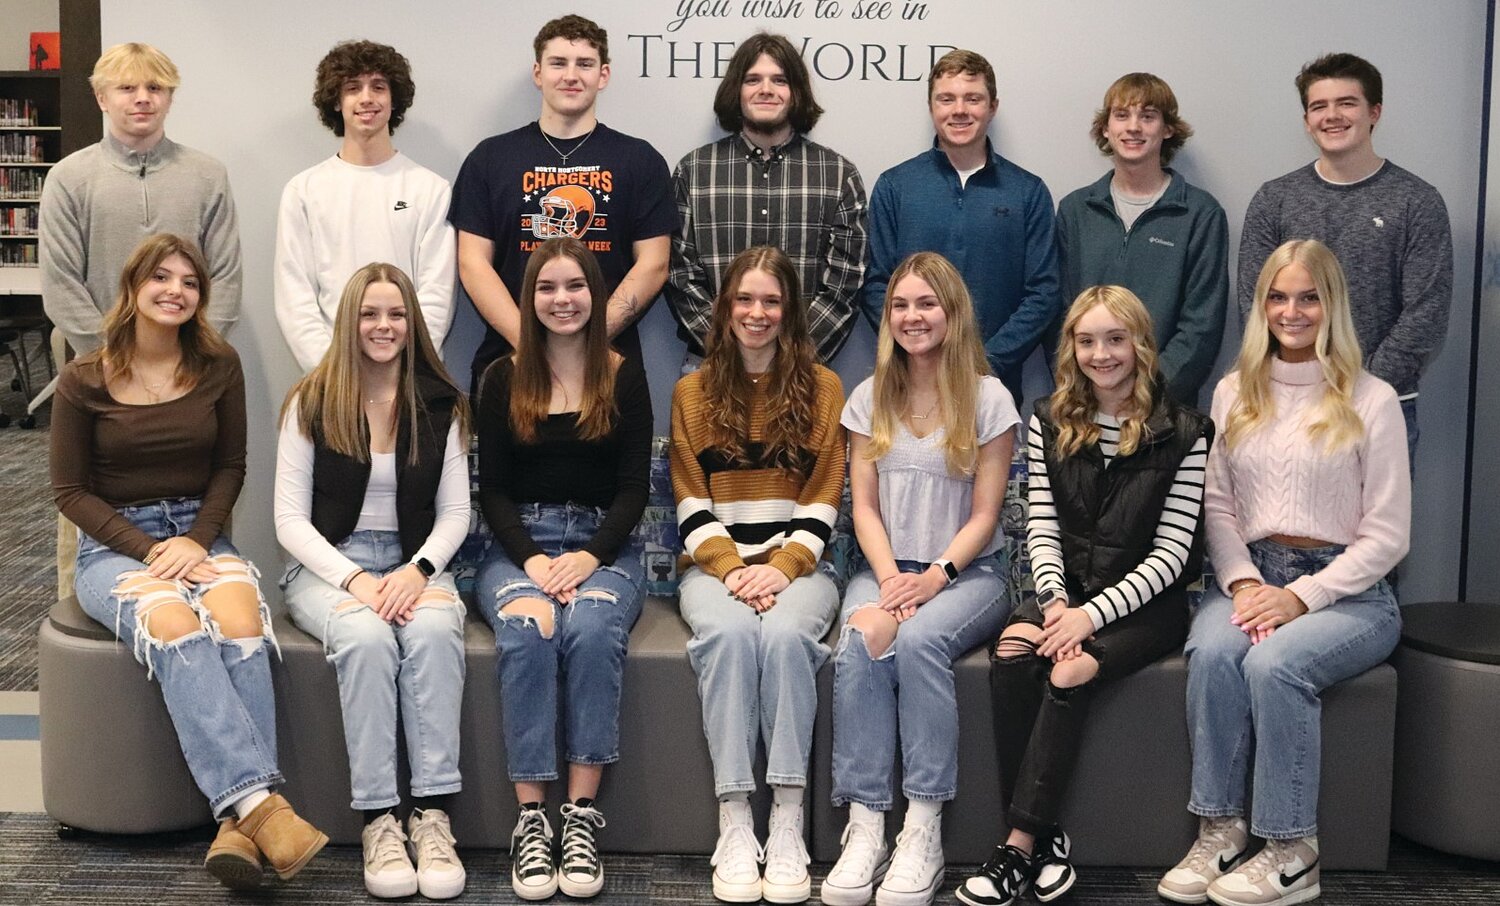 Members of the North Montgomery High School Winter Homecoming Court are, from left, front row, Rilee Martin, Abigal Allen, Sydney Neideffer, Trista Thomas, Shayna Ratcliff, Dericka Jeffers and Emma Leonhardt; and back row,  Hunter Haworth, Tripp Wathen, Corbin Meadows, Colin Campbell, Brent Runyan, Tanner Schultz and Crew Cole. The students will be recognized Friday during the game against Frankfort.